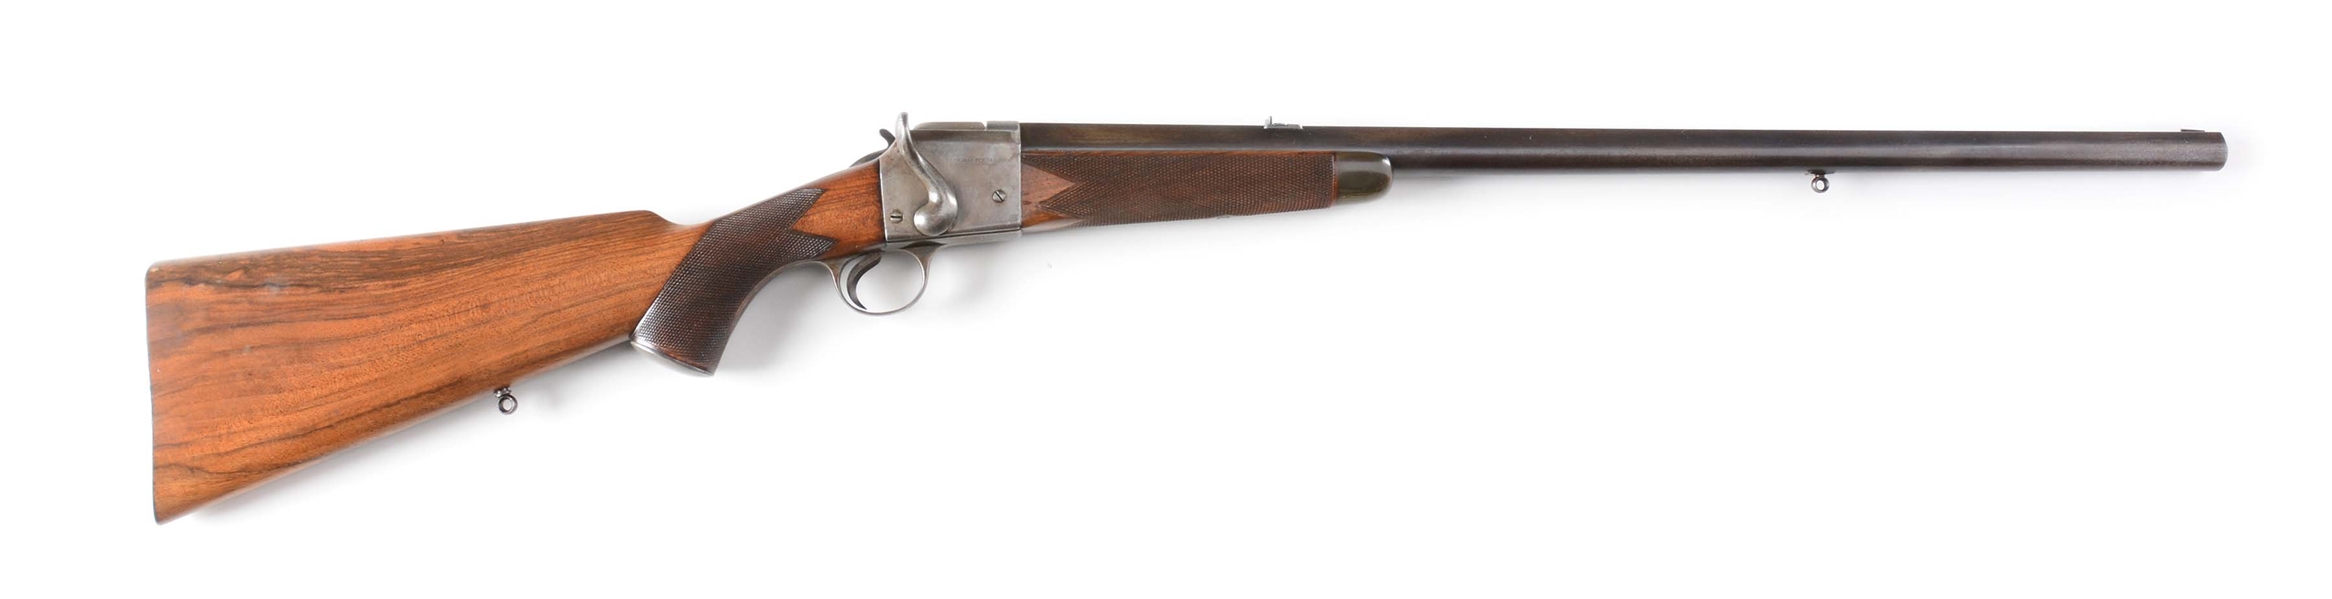 (A) FIELDS PATENT SINGLE SHOT DROPPING BLOCK SPORTING RIFLE FINISHED AND RETAILED BY THOMAS TURNER FOR NEW BRUNSWICK COMPANY, MOST LIKELY FOR THE SEAL TRADE.